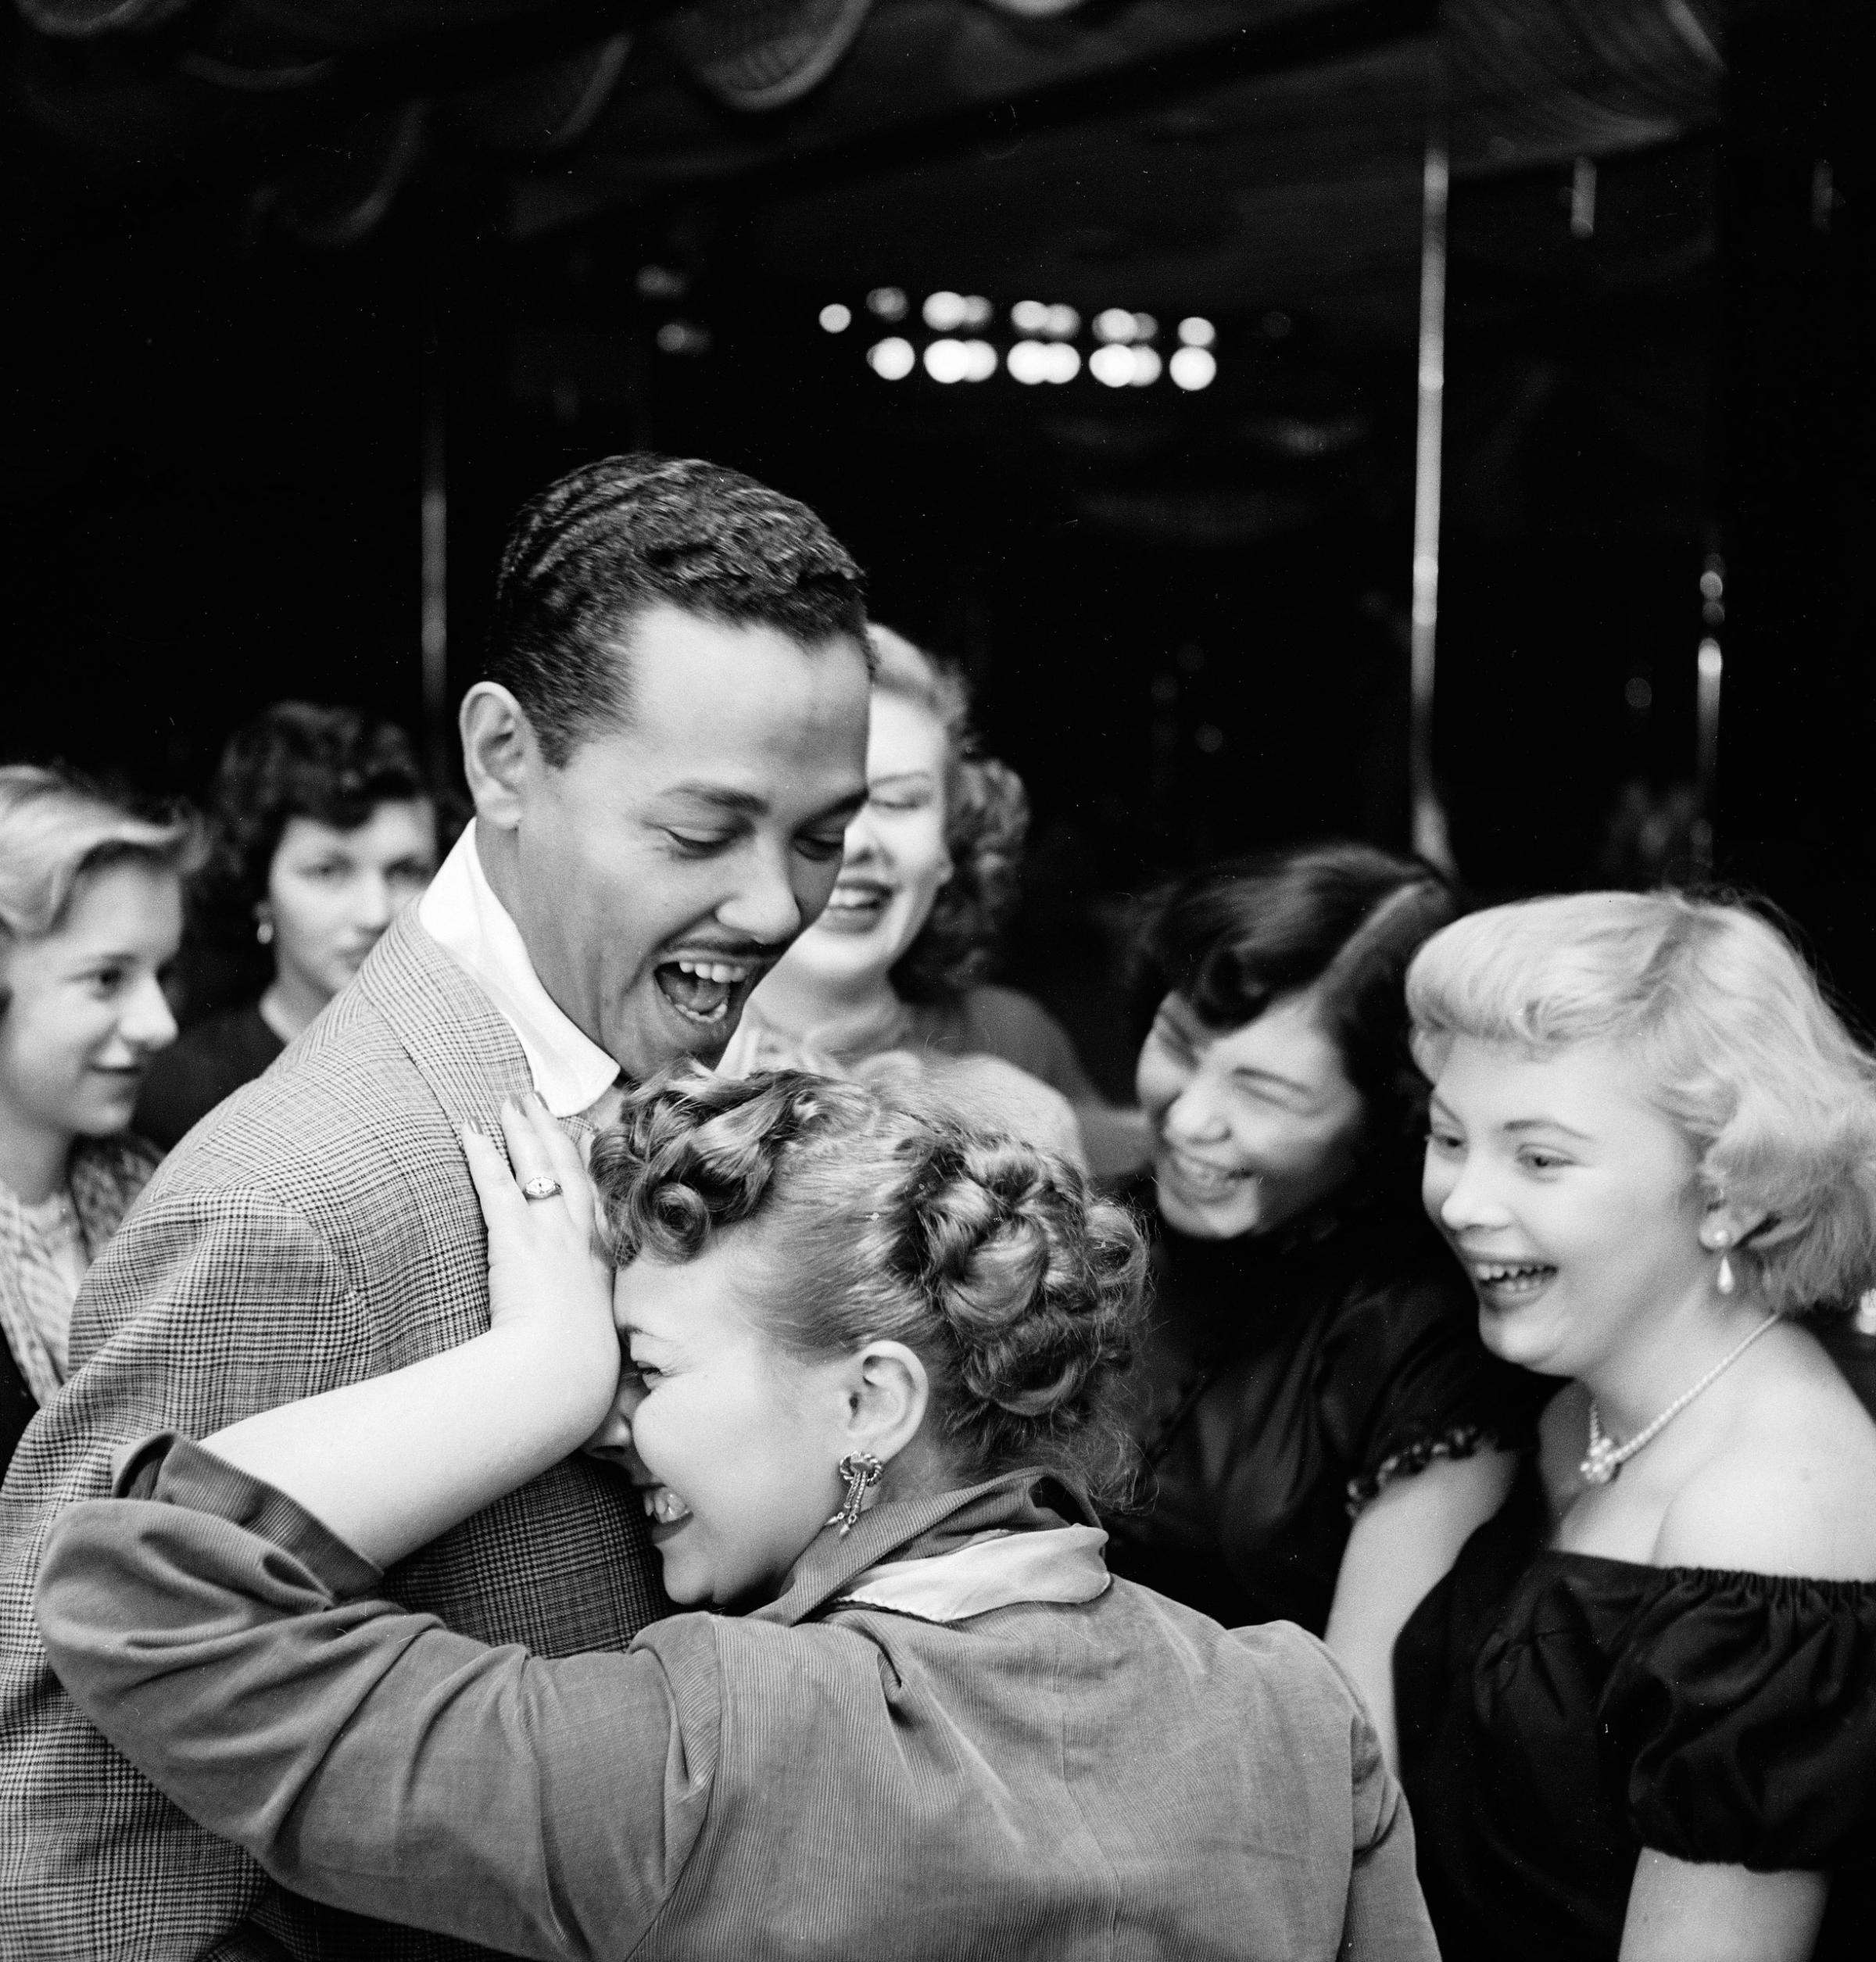 Singer and bandleader Billy Eckstine gets a hug from an adoring fan after a show at the late, great New York City jazz club, Bop City, 1949.